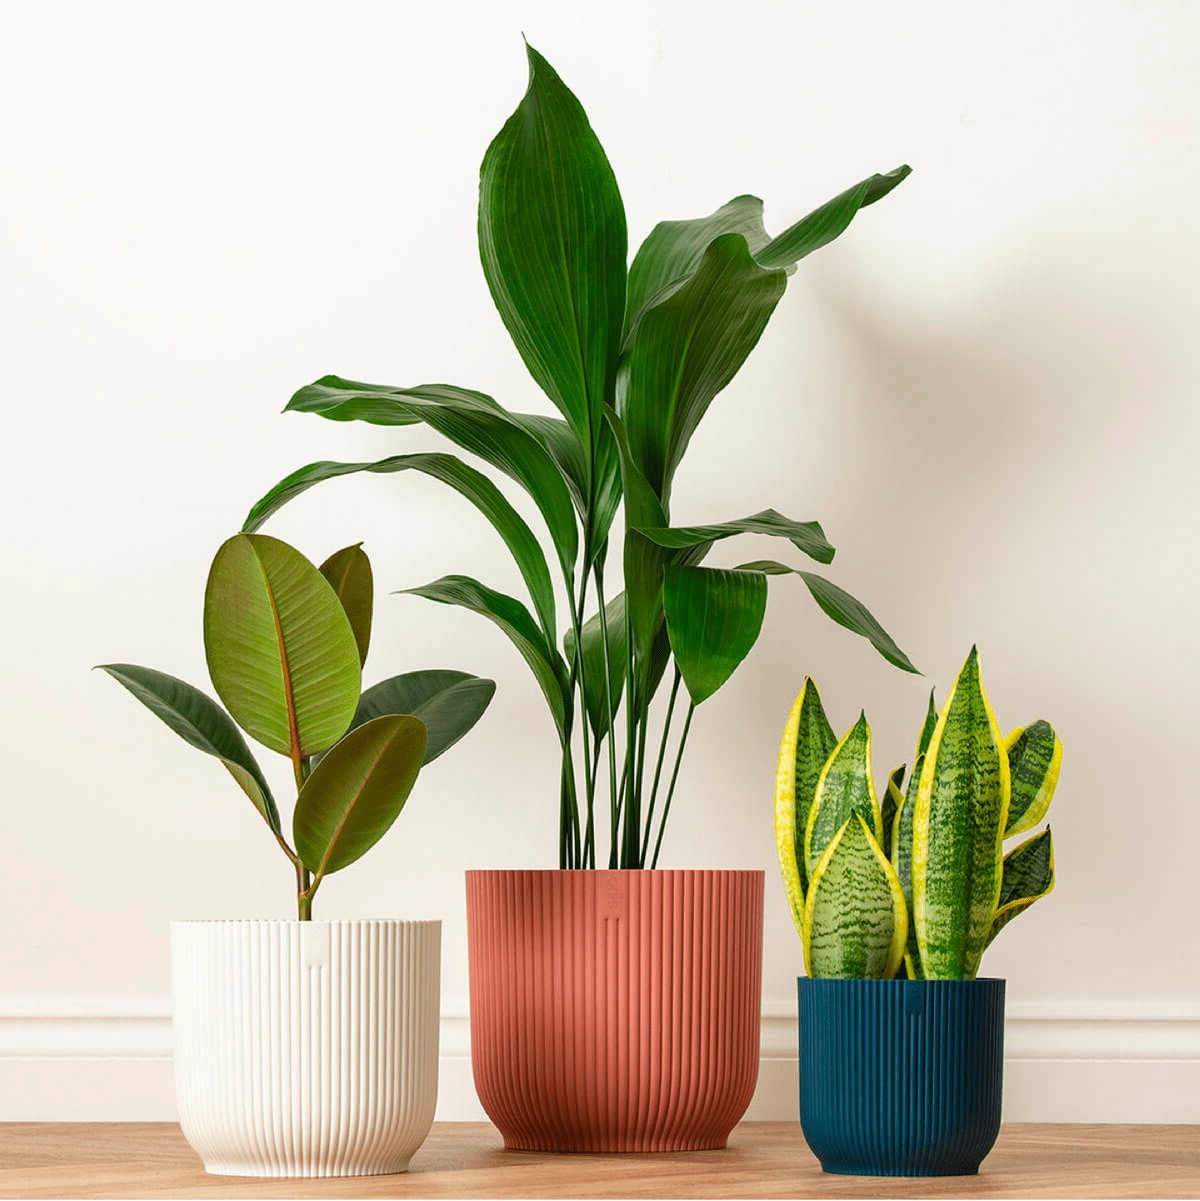 Onstate Launches a New House Plant Brand Online